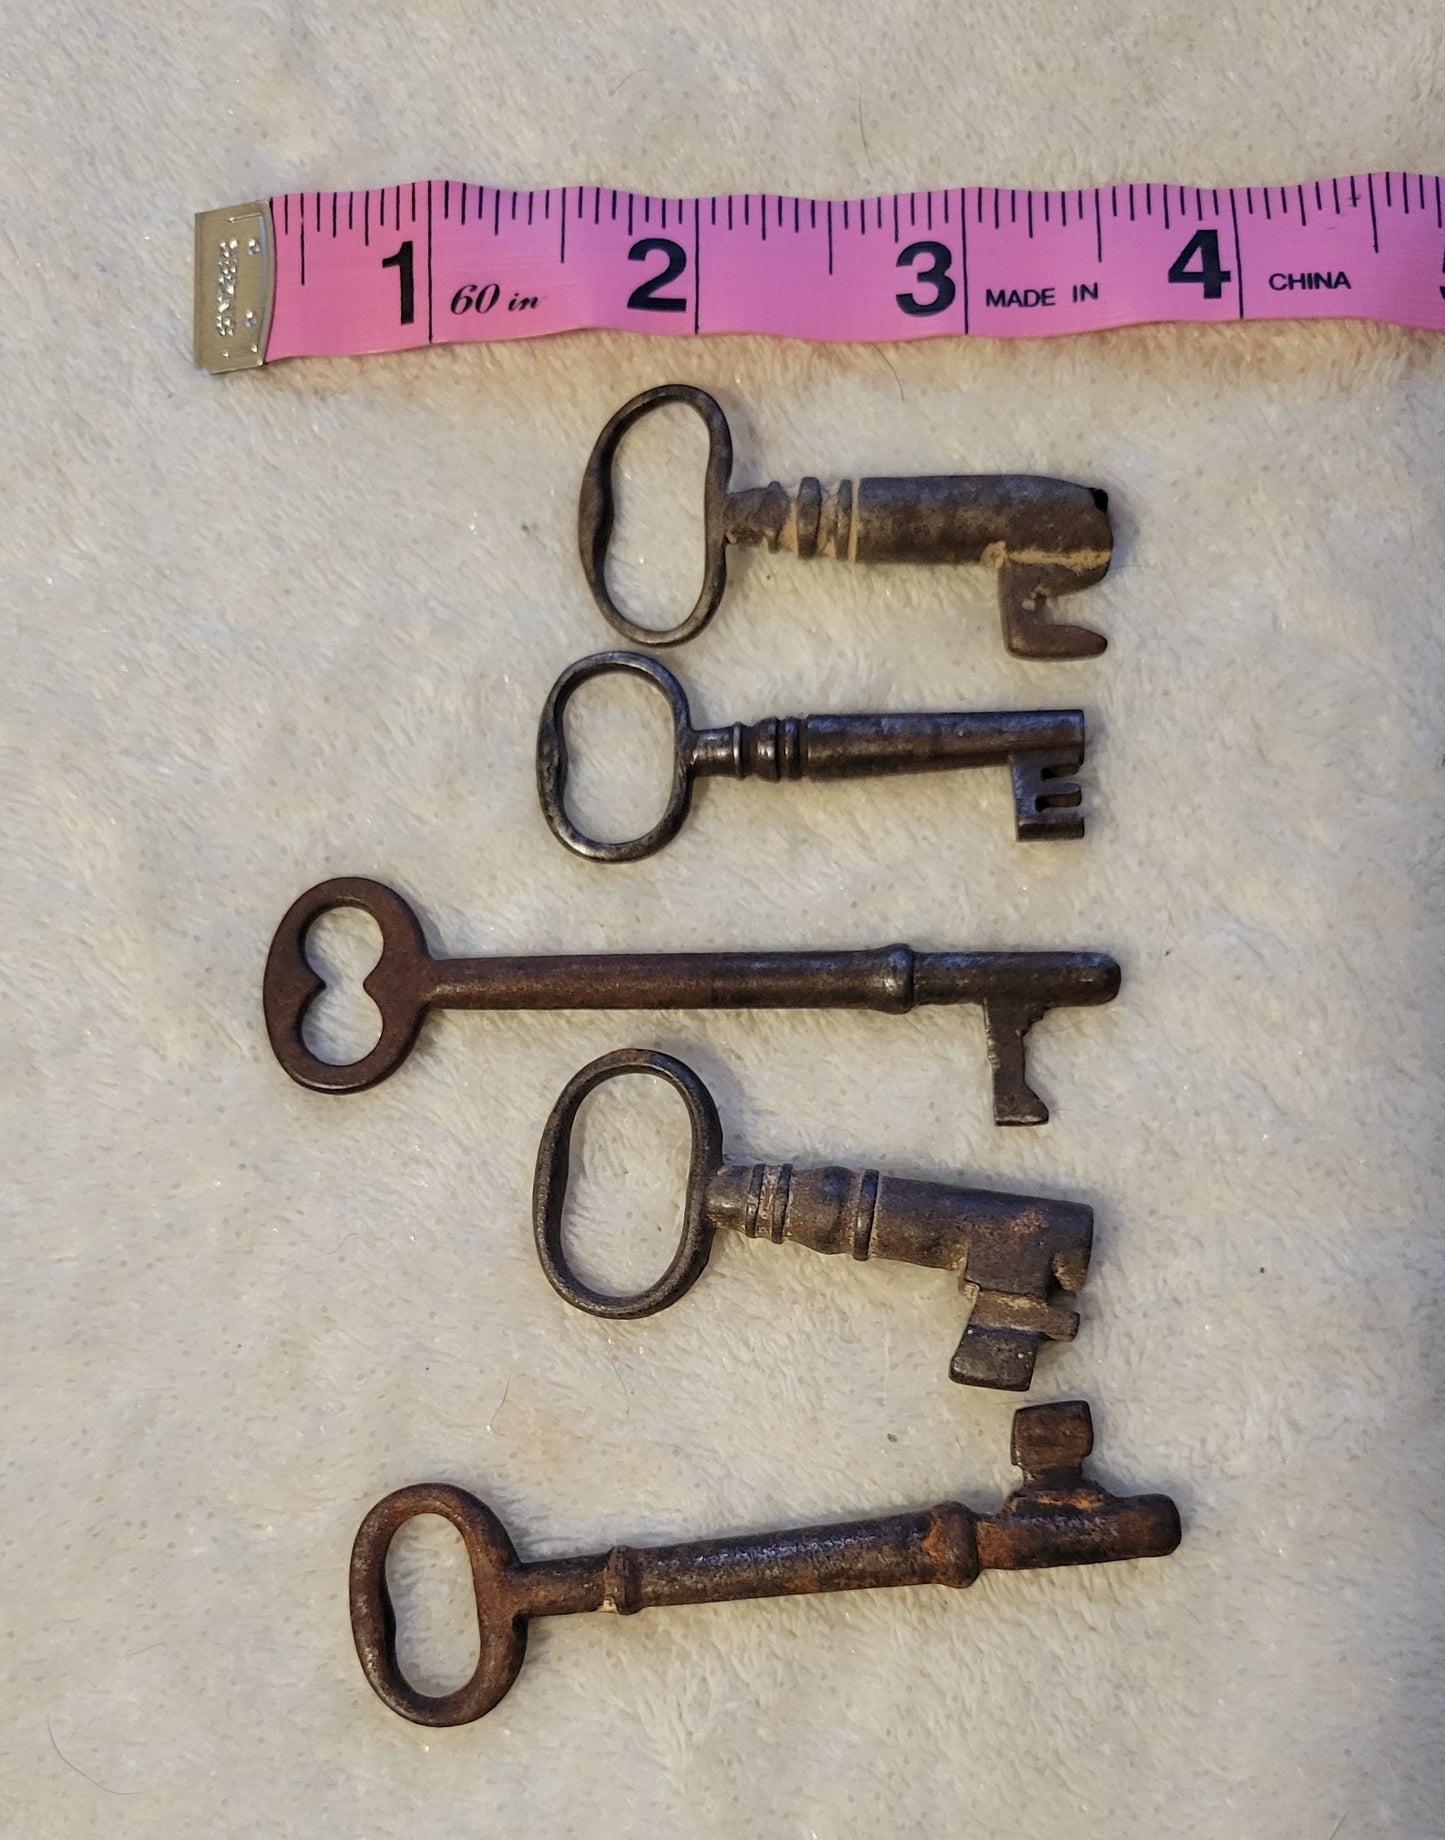 We have a collection of small, metal, antique keys (from which we will pick one for your order).  View of several metal antique, vintage keys.